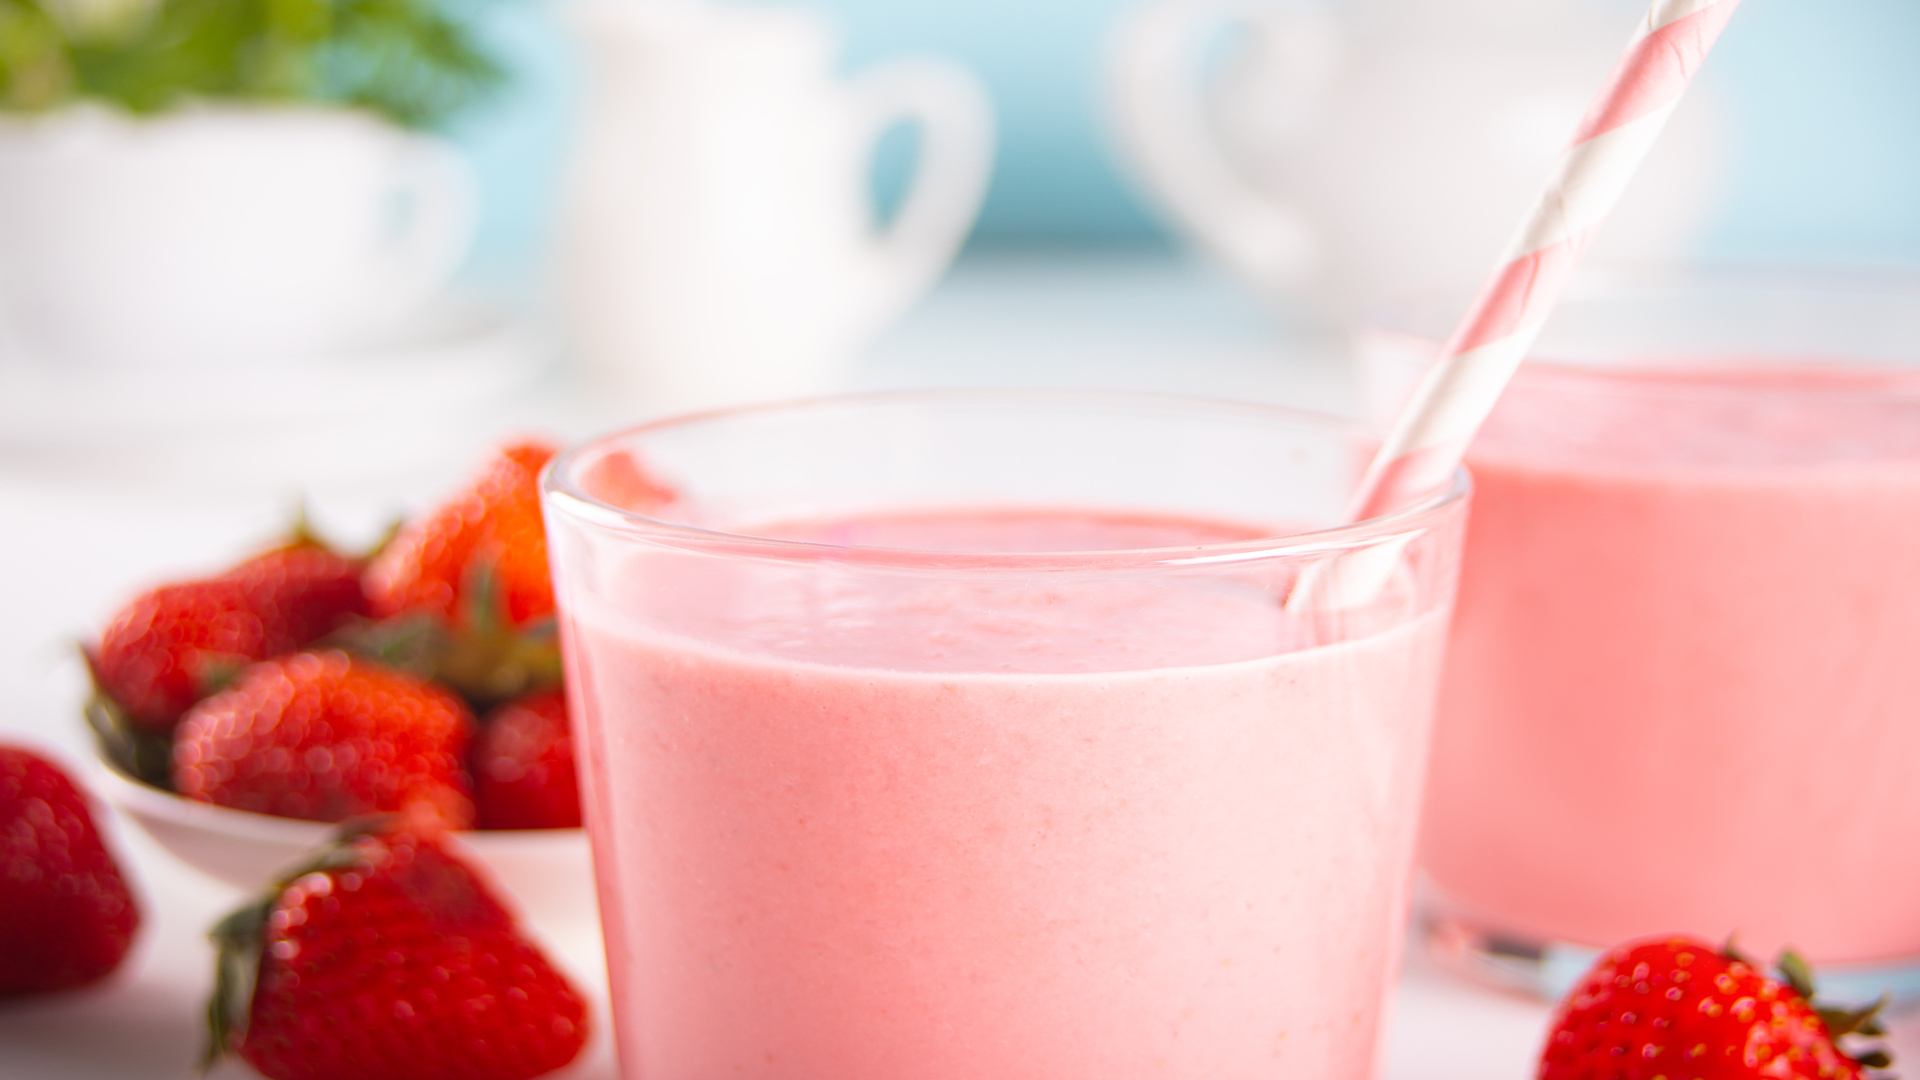 Strawberry Smoothie for Weight Loss